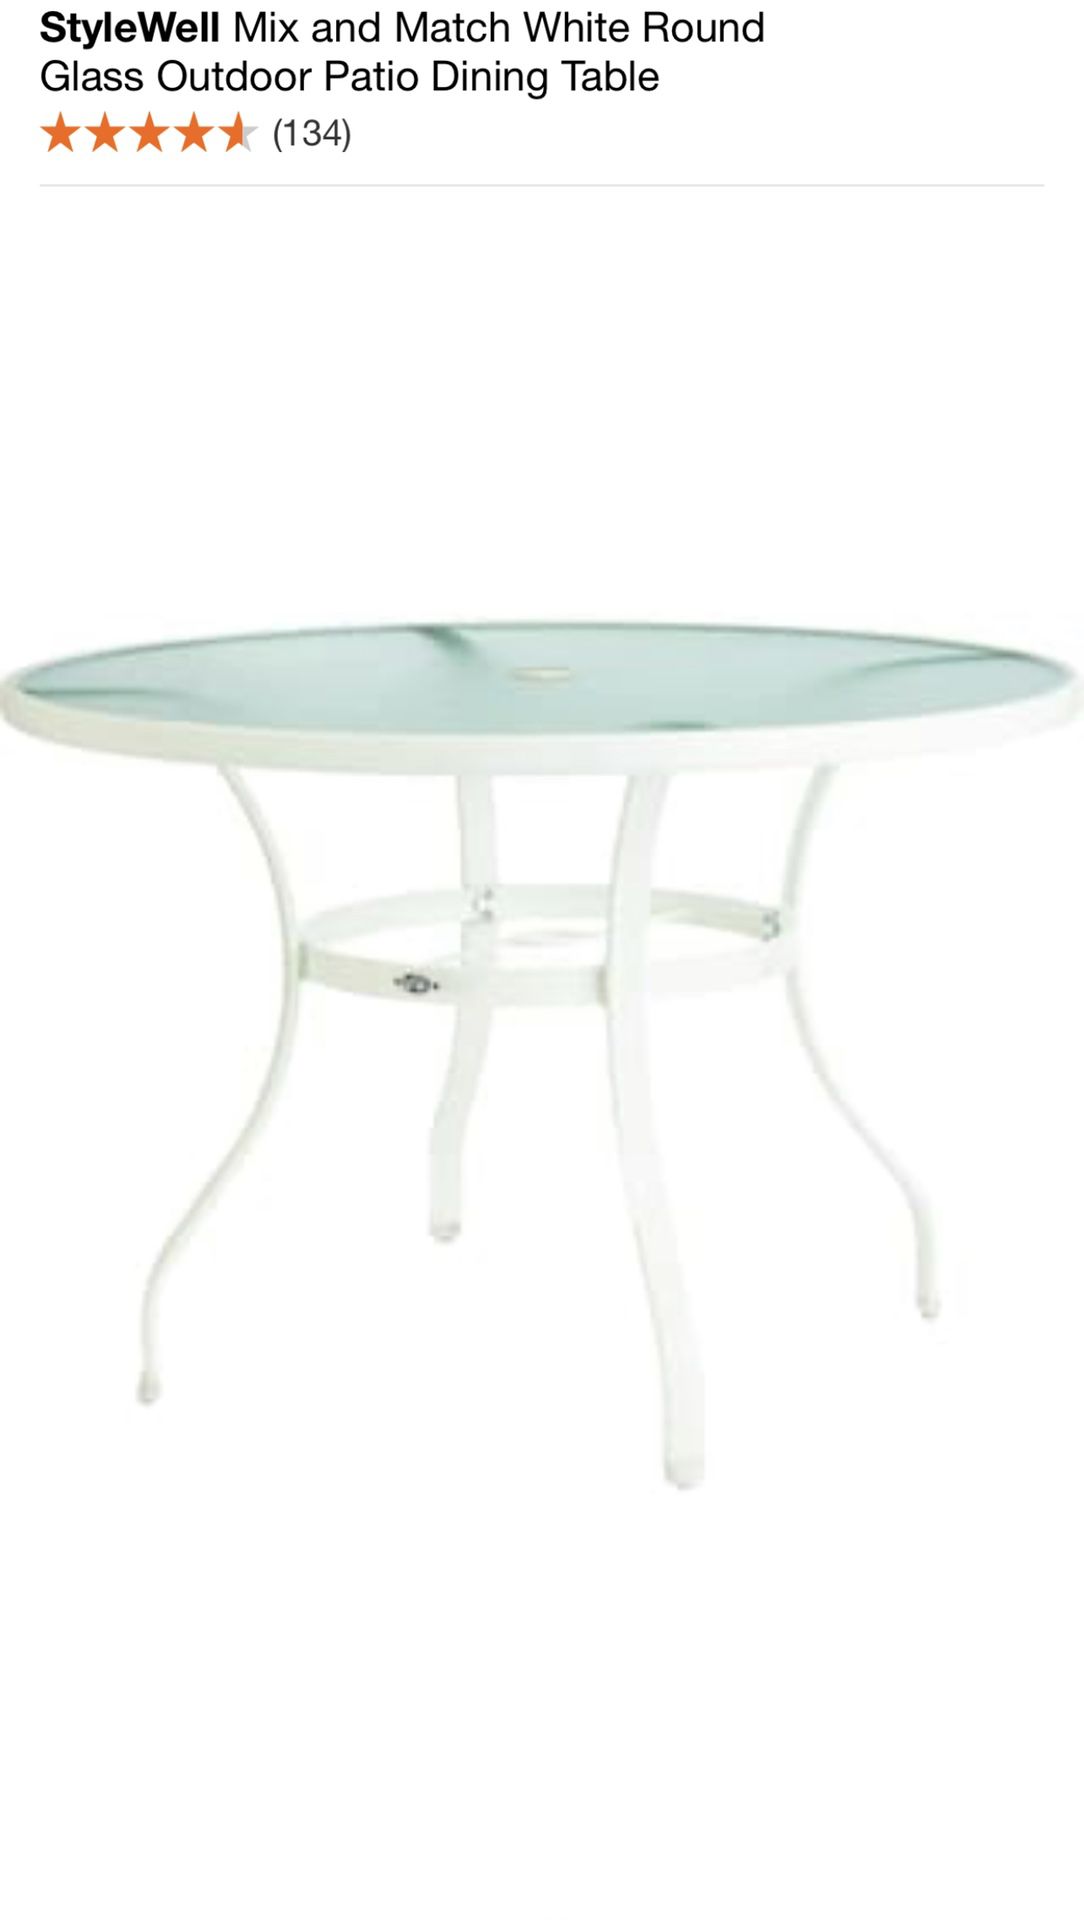 StyleWell Mix and Match White Round Glass Outdoor Patio Dining Table